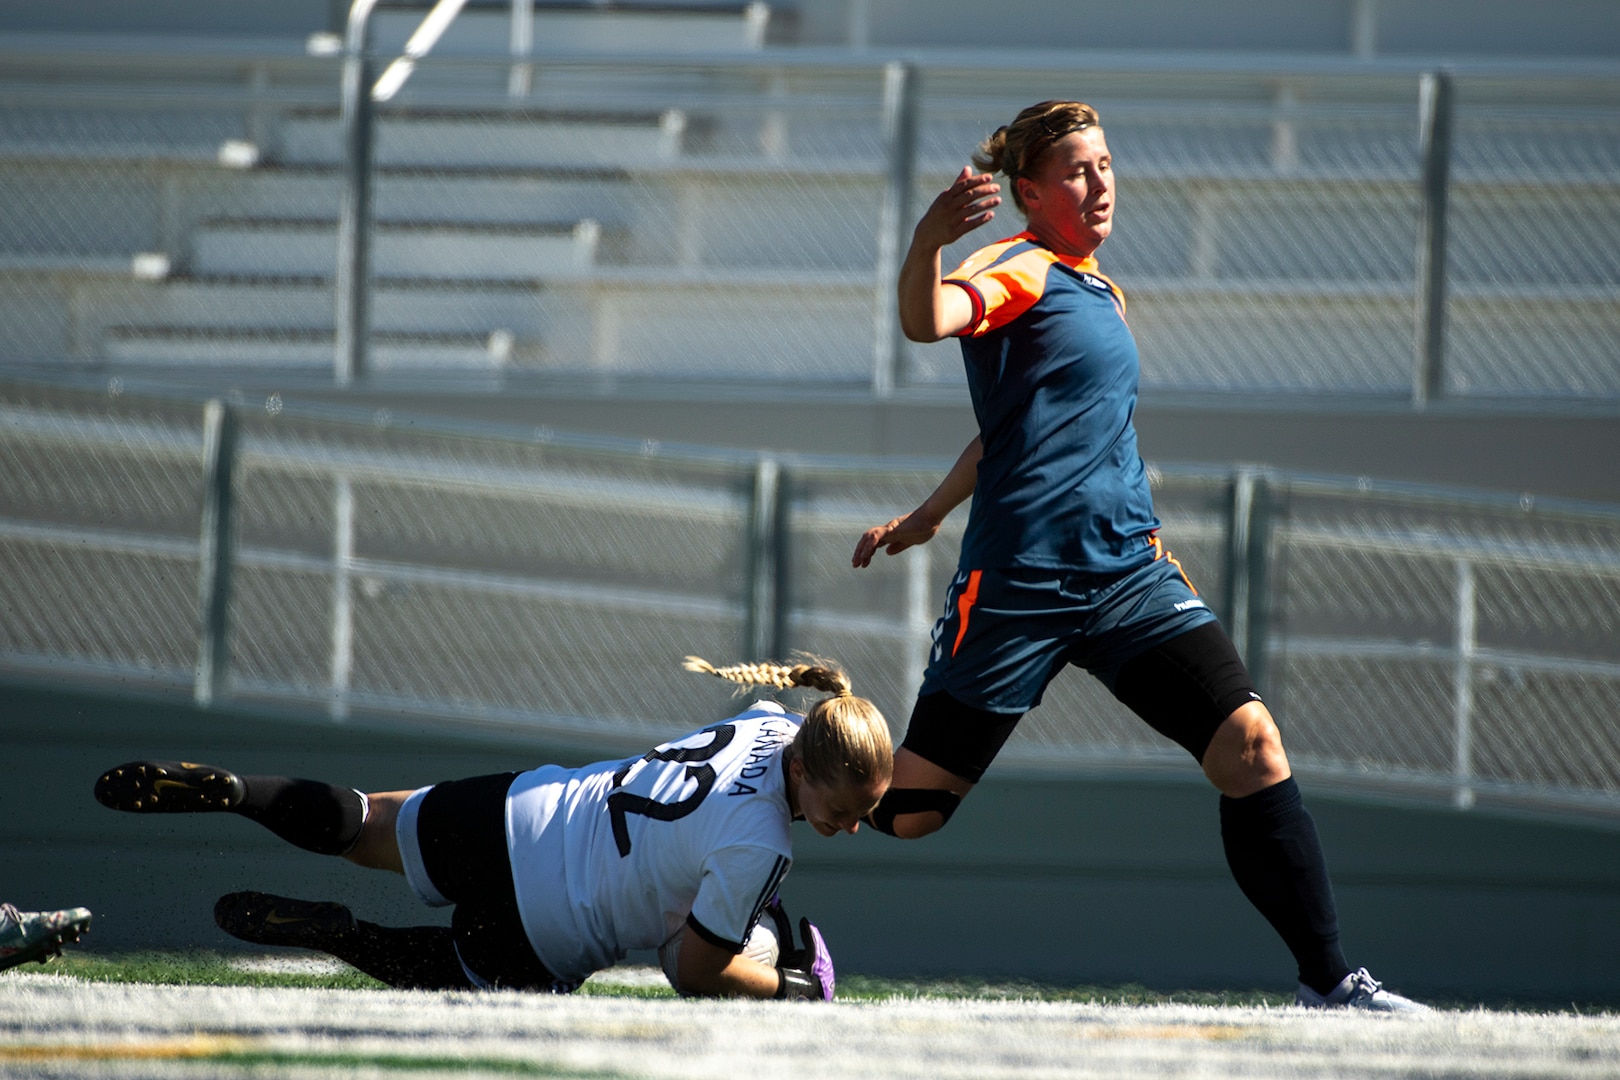 Canada’s Caroline Wood makes a save against OR-5 Margriet Samsom of Team Netherlands during the 13th CISM (International Military Sports Council) World Military Women’s Football Championship in Meade, Washington July 14, 2022. (DoD photo by EJ Hersom)